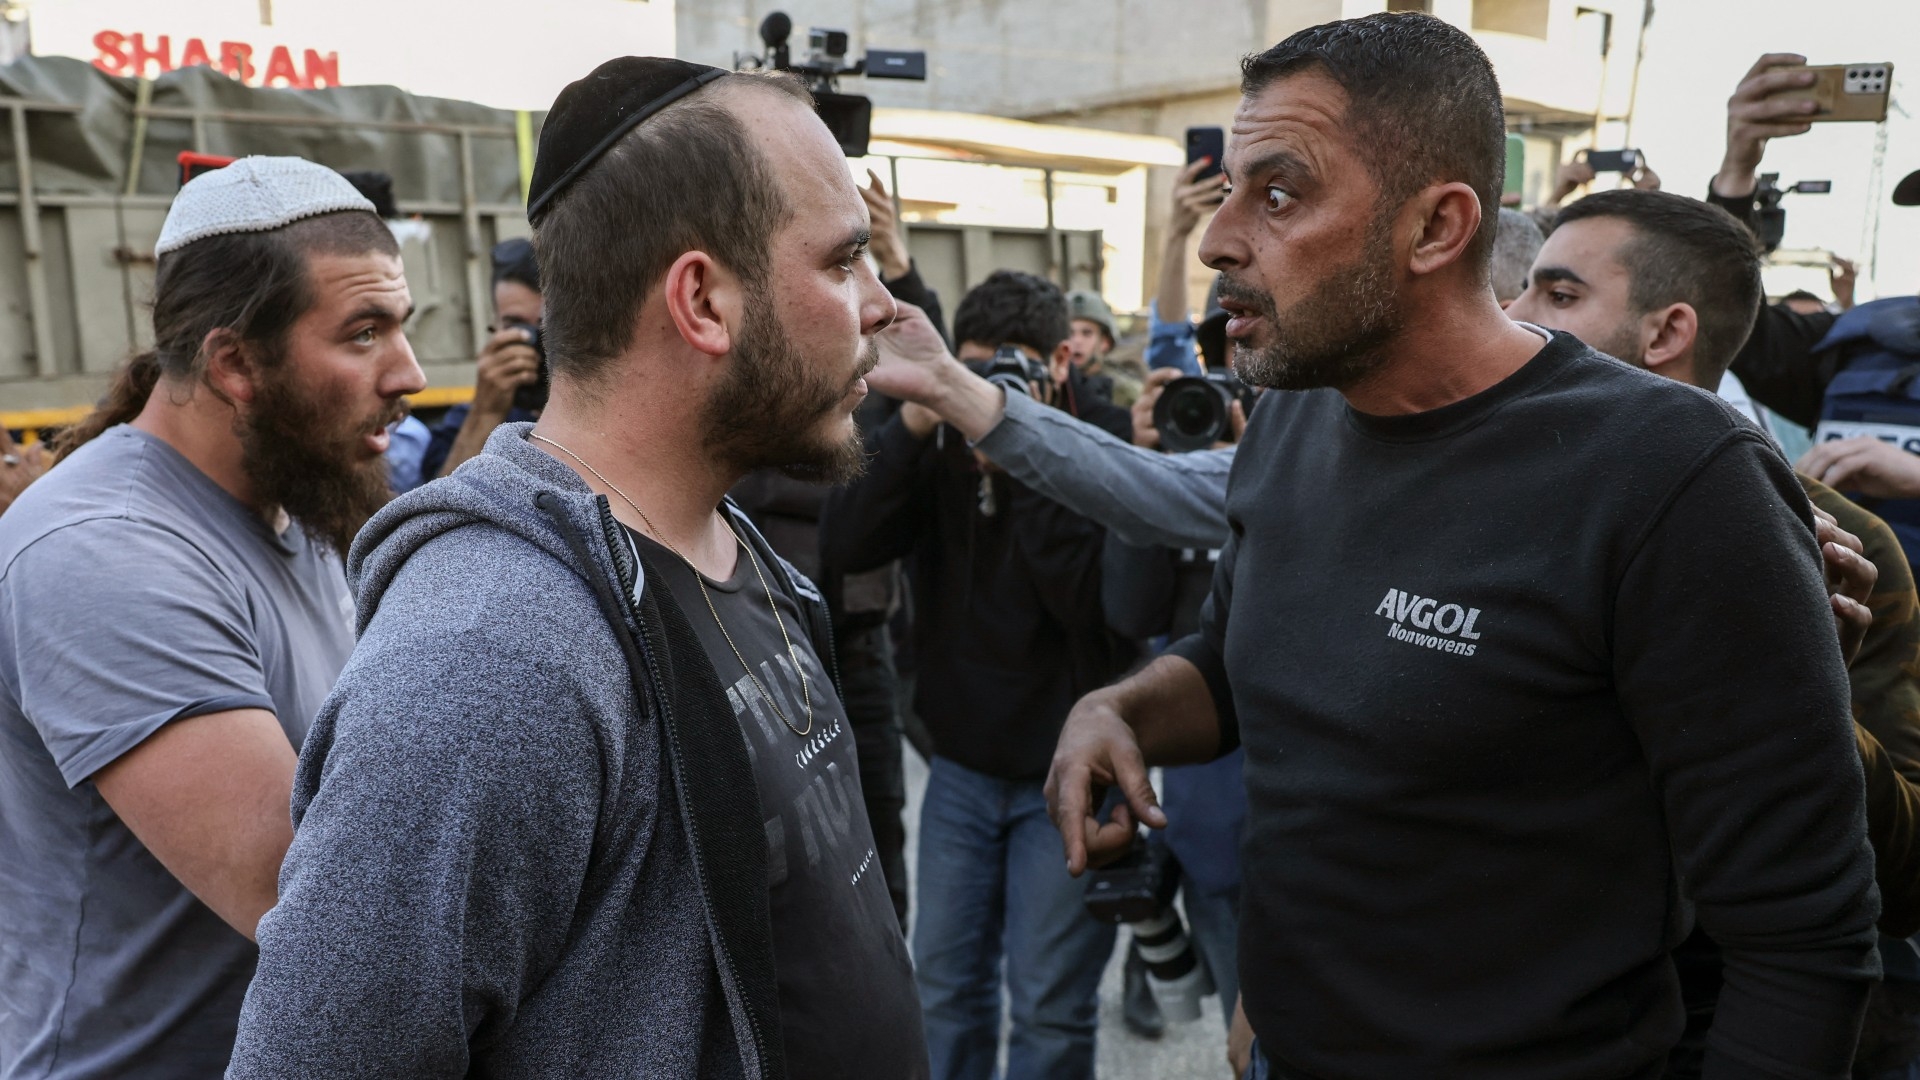 Israeli settlers confront a Palestinian in the West Bank town of Huwwara 27 February (AFP)